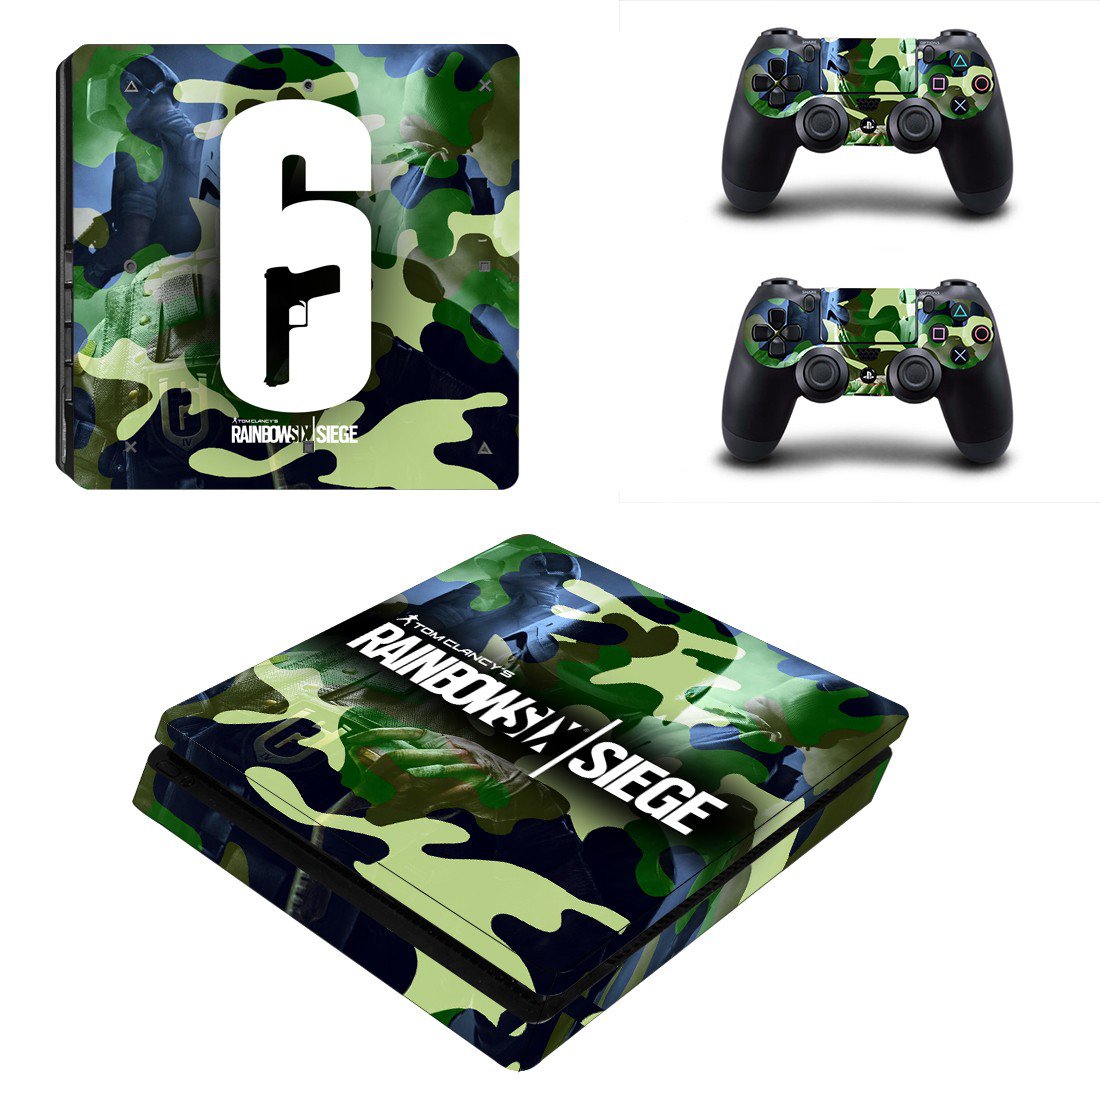 Rainbow Six Siege Decal Skin Sticker For Ps4 Slim Console And Controllers